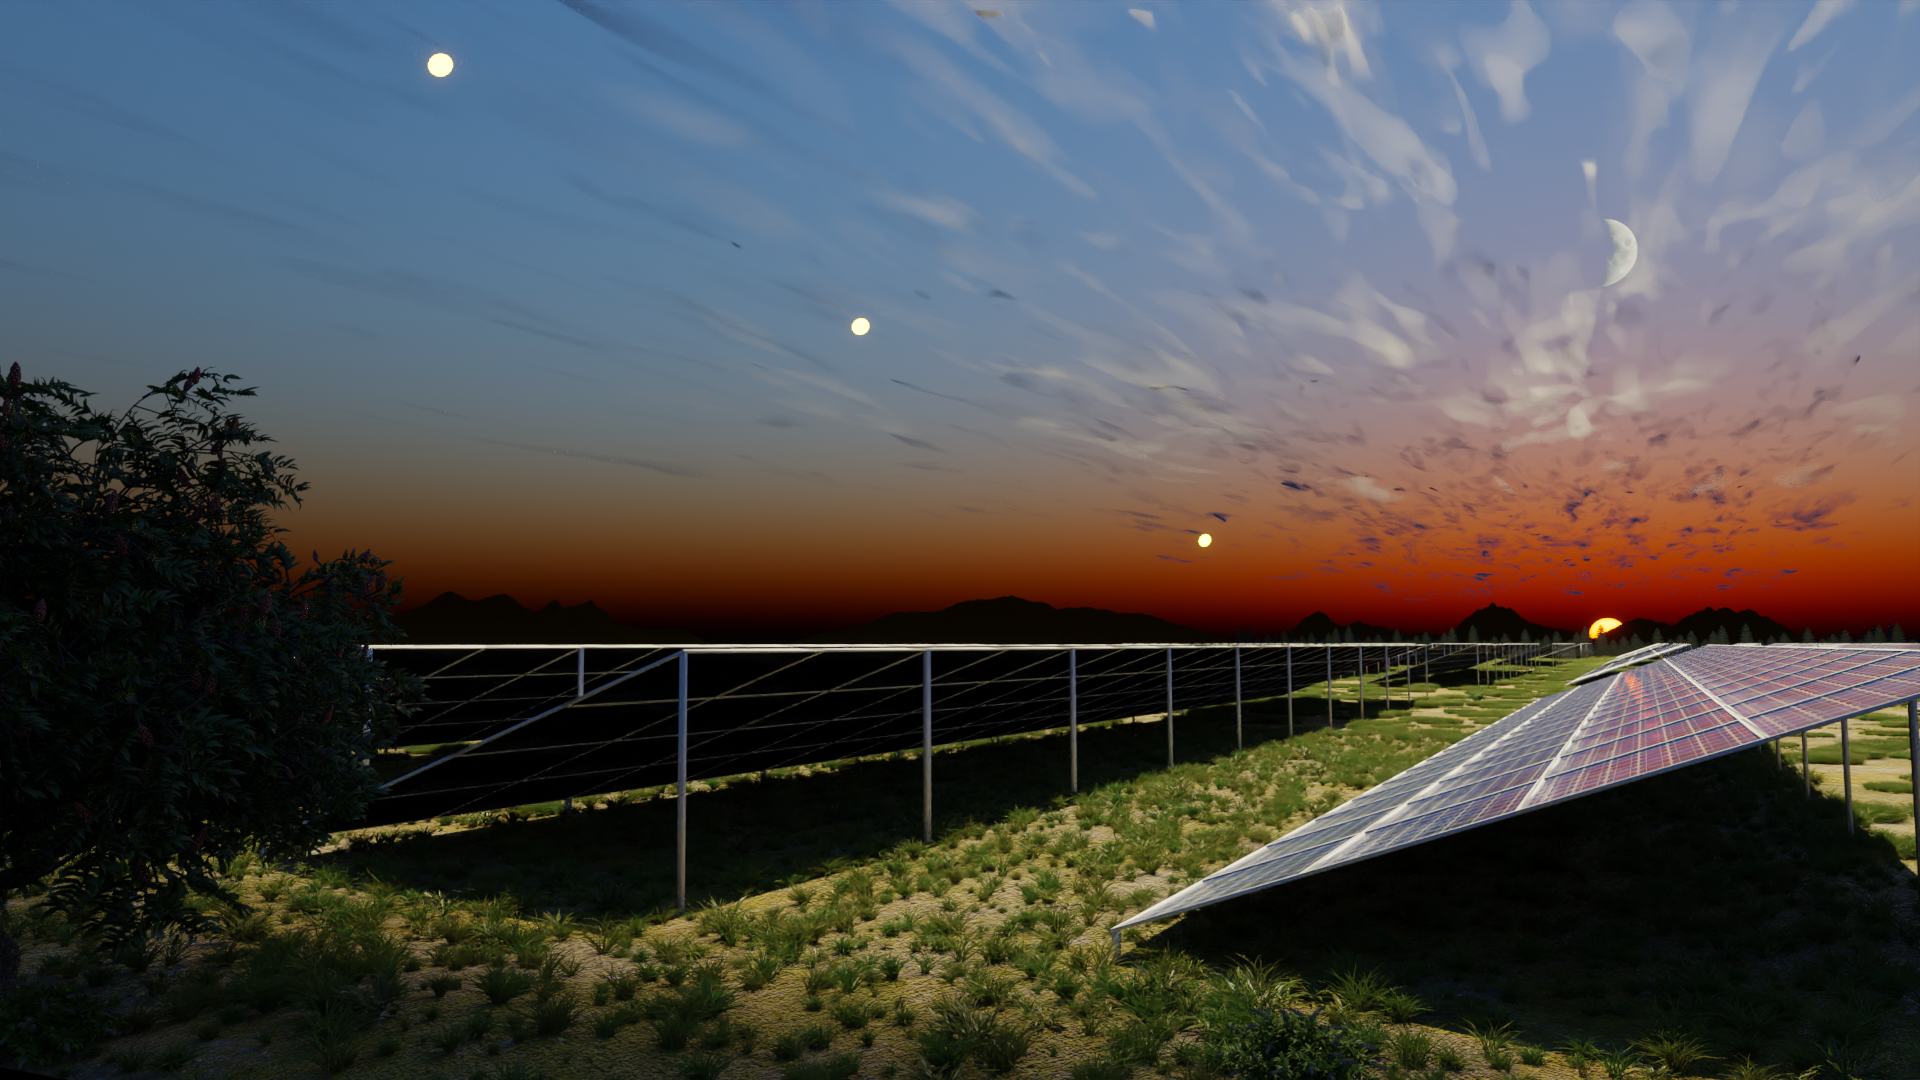 Solar power farm receives additional sunlight from space based reflectors Credits: Dr. Andrea Viale, NASA